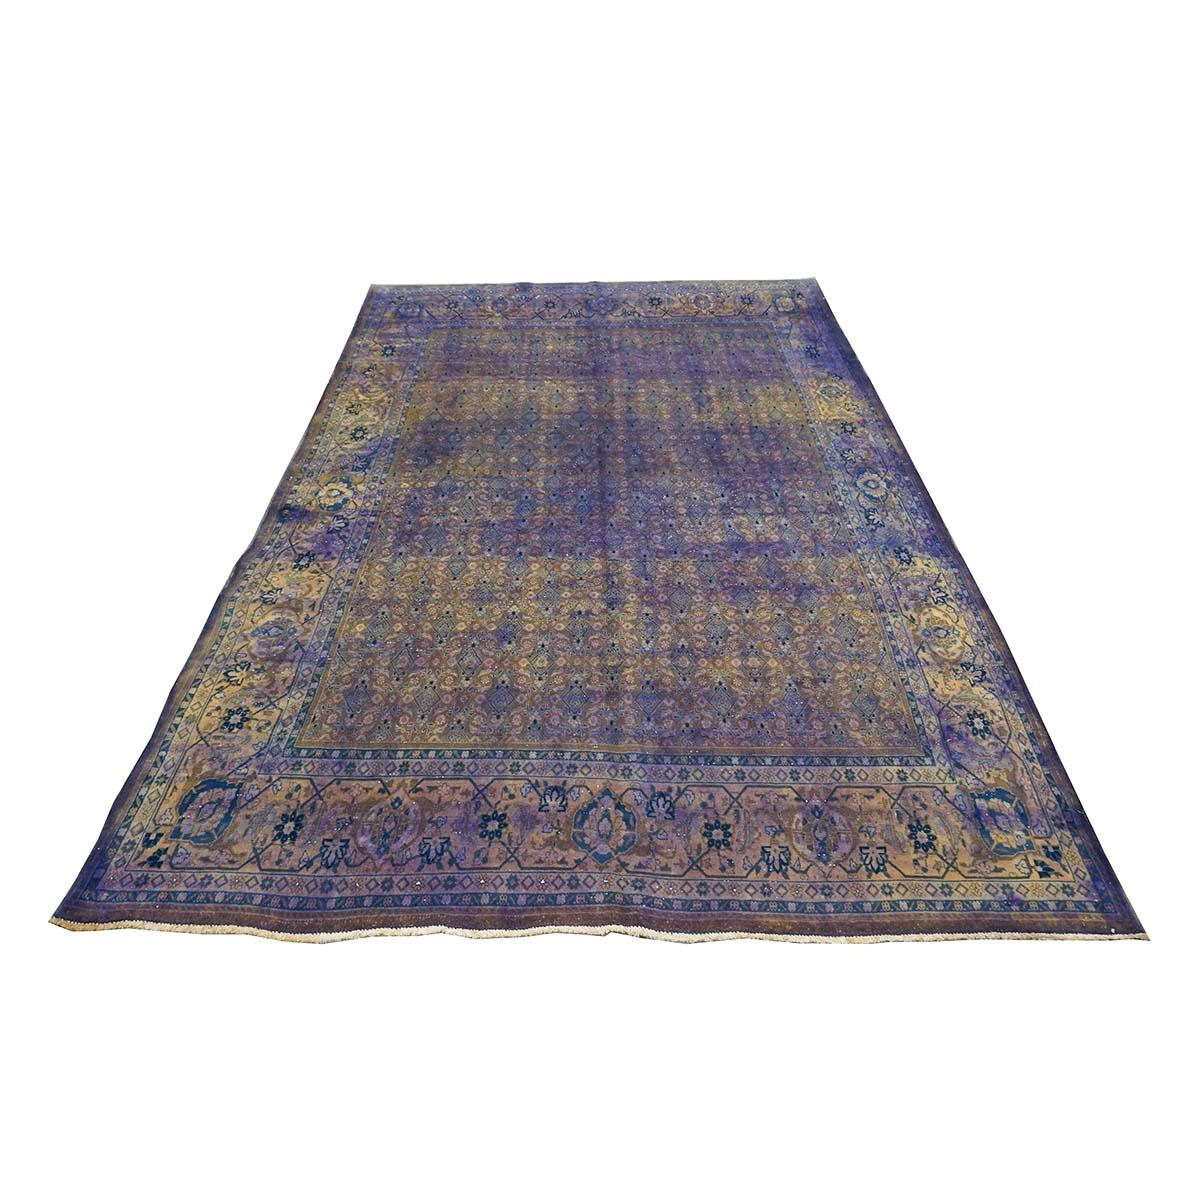  Ashly Fine Rugs presents a Vintage Persian Mahal Modern Overdye 7x10 Purple Handmade Area Rug. Originating from the Mahallat region of Persia (Central Iran), Mahal rugs are widely sought after by interior designers and connoisseurs alike thanks to